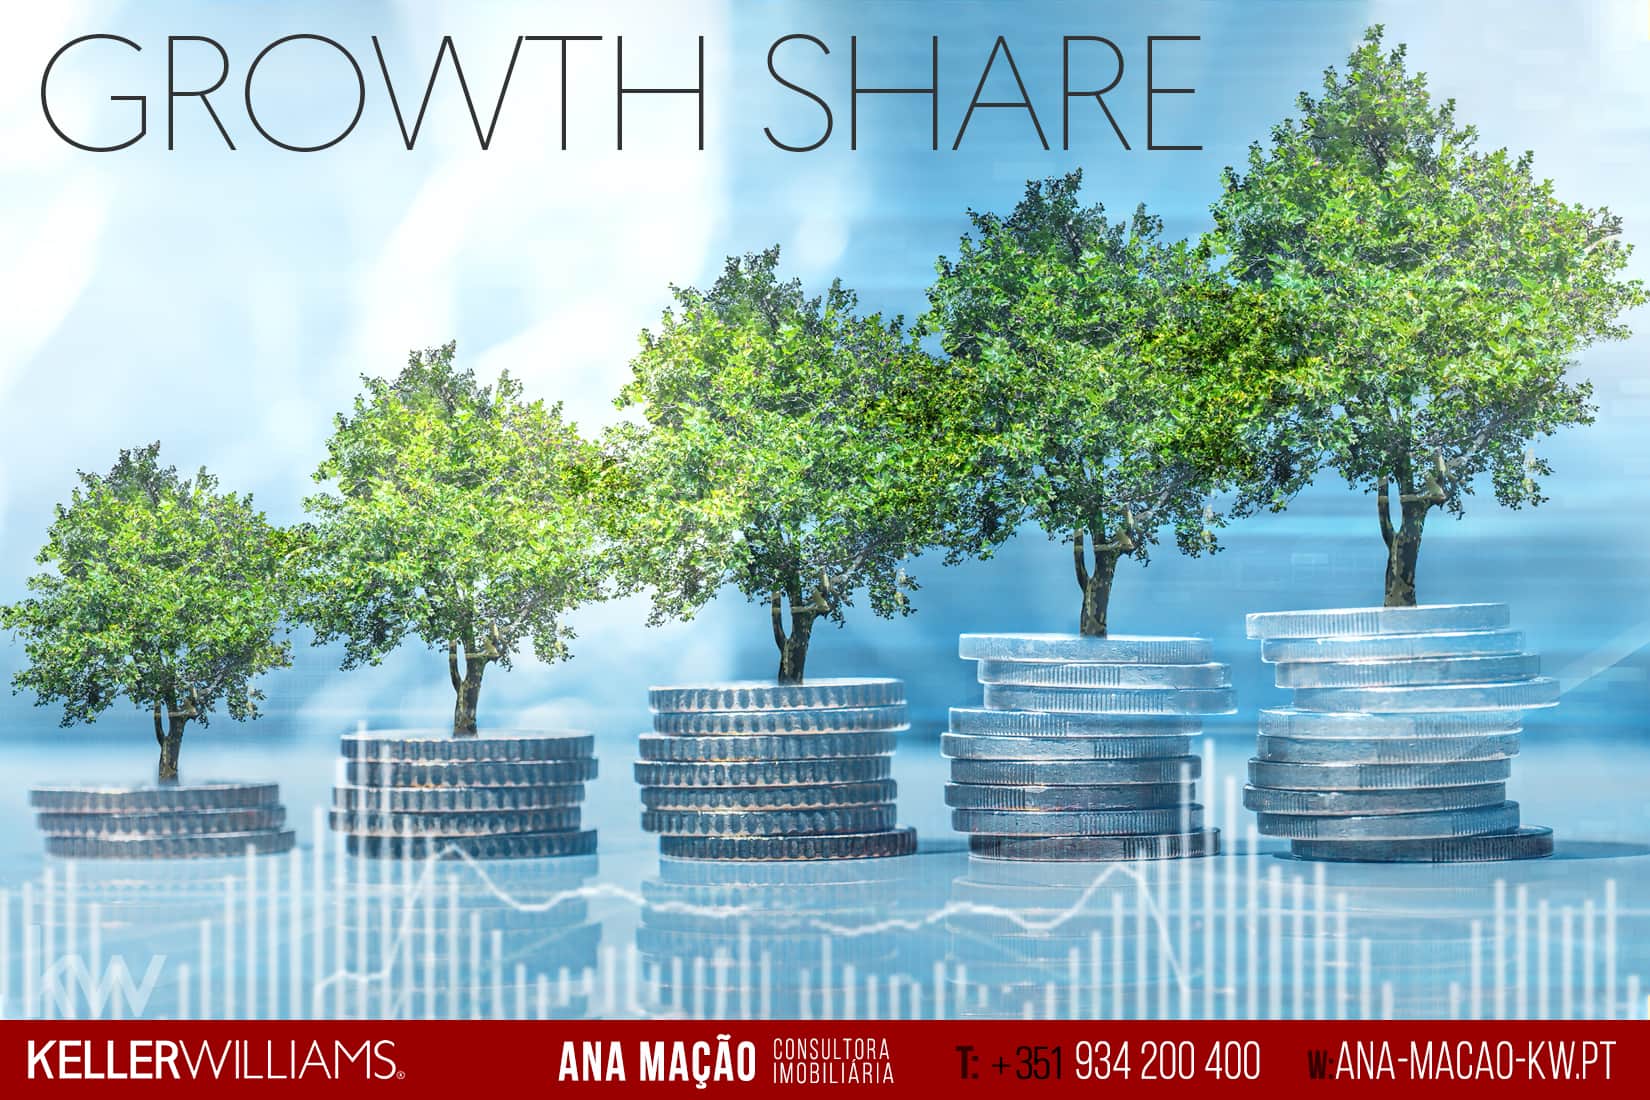 Growht Share is a Keller Williams remuneration policy that rewards those who help grow the KW network